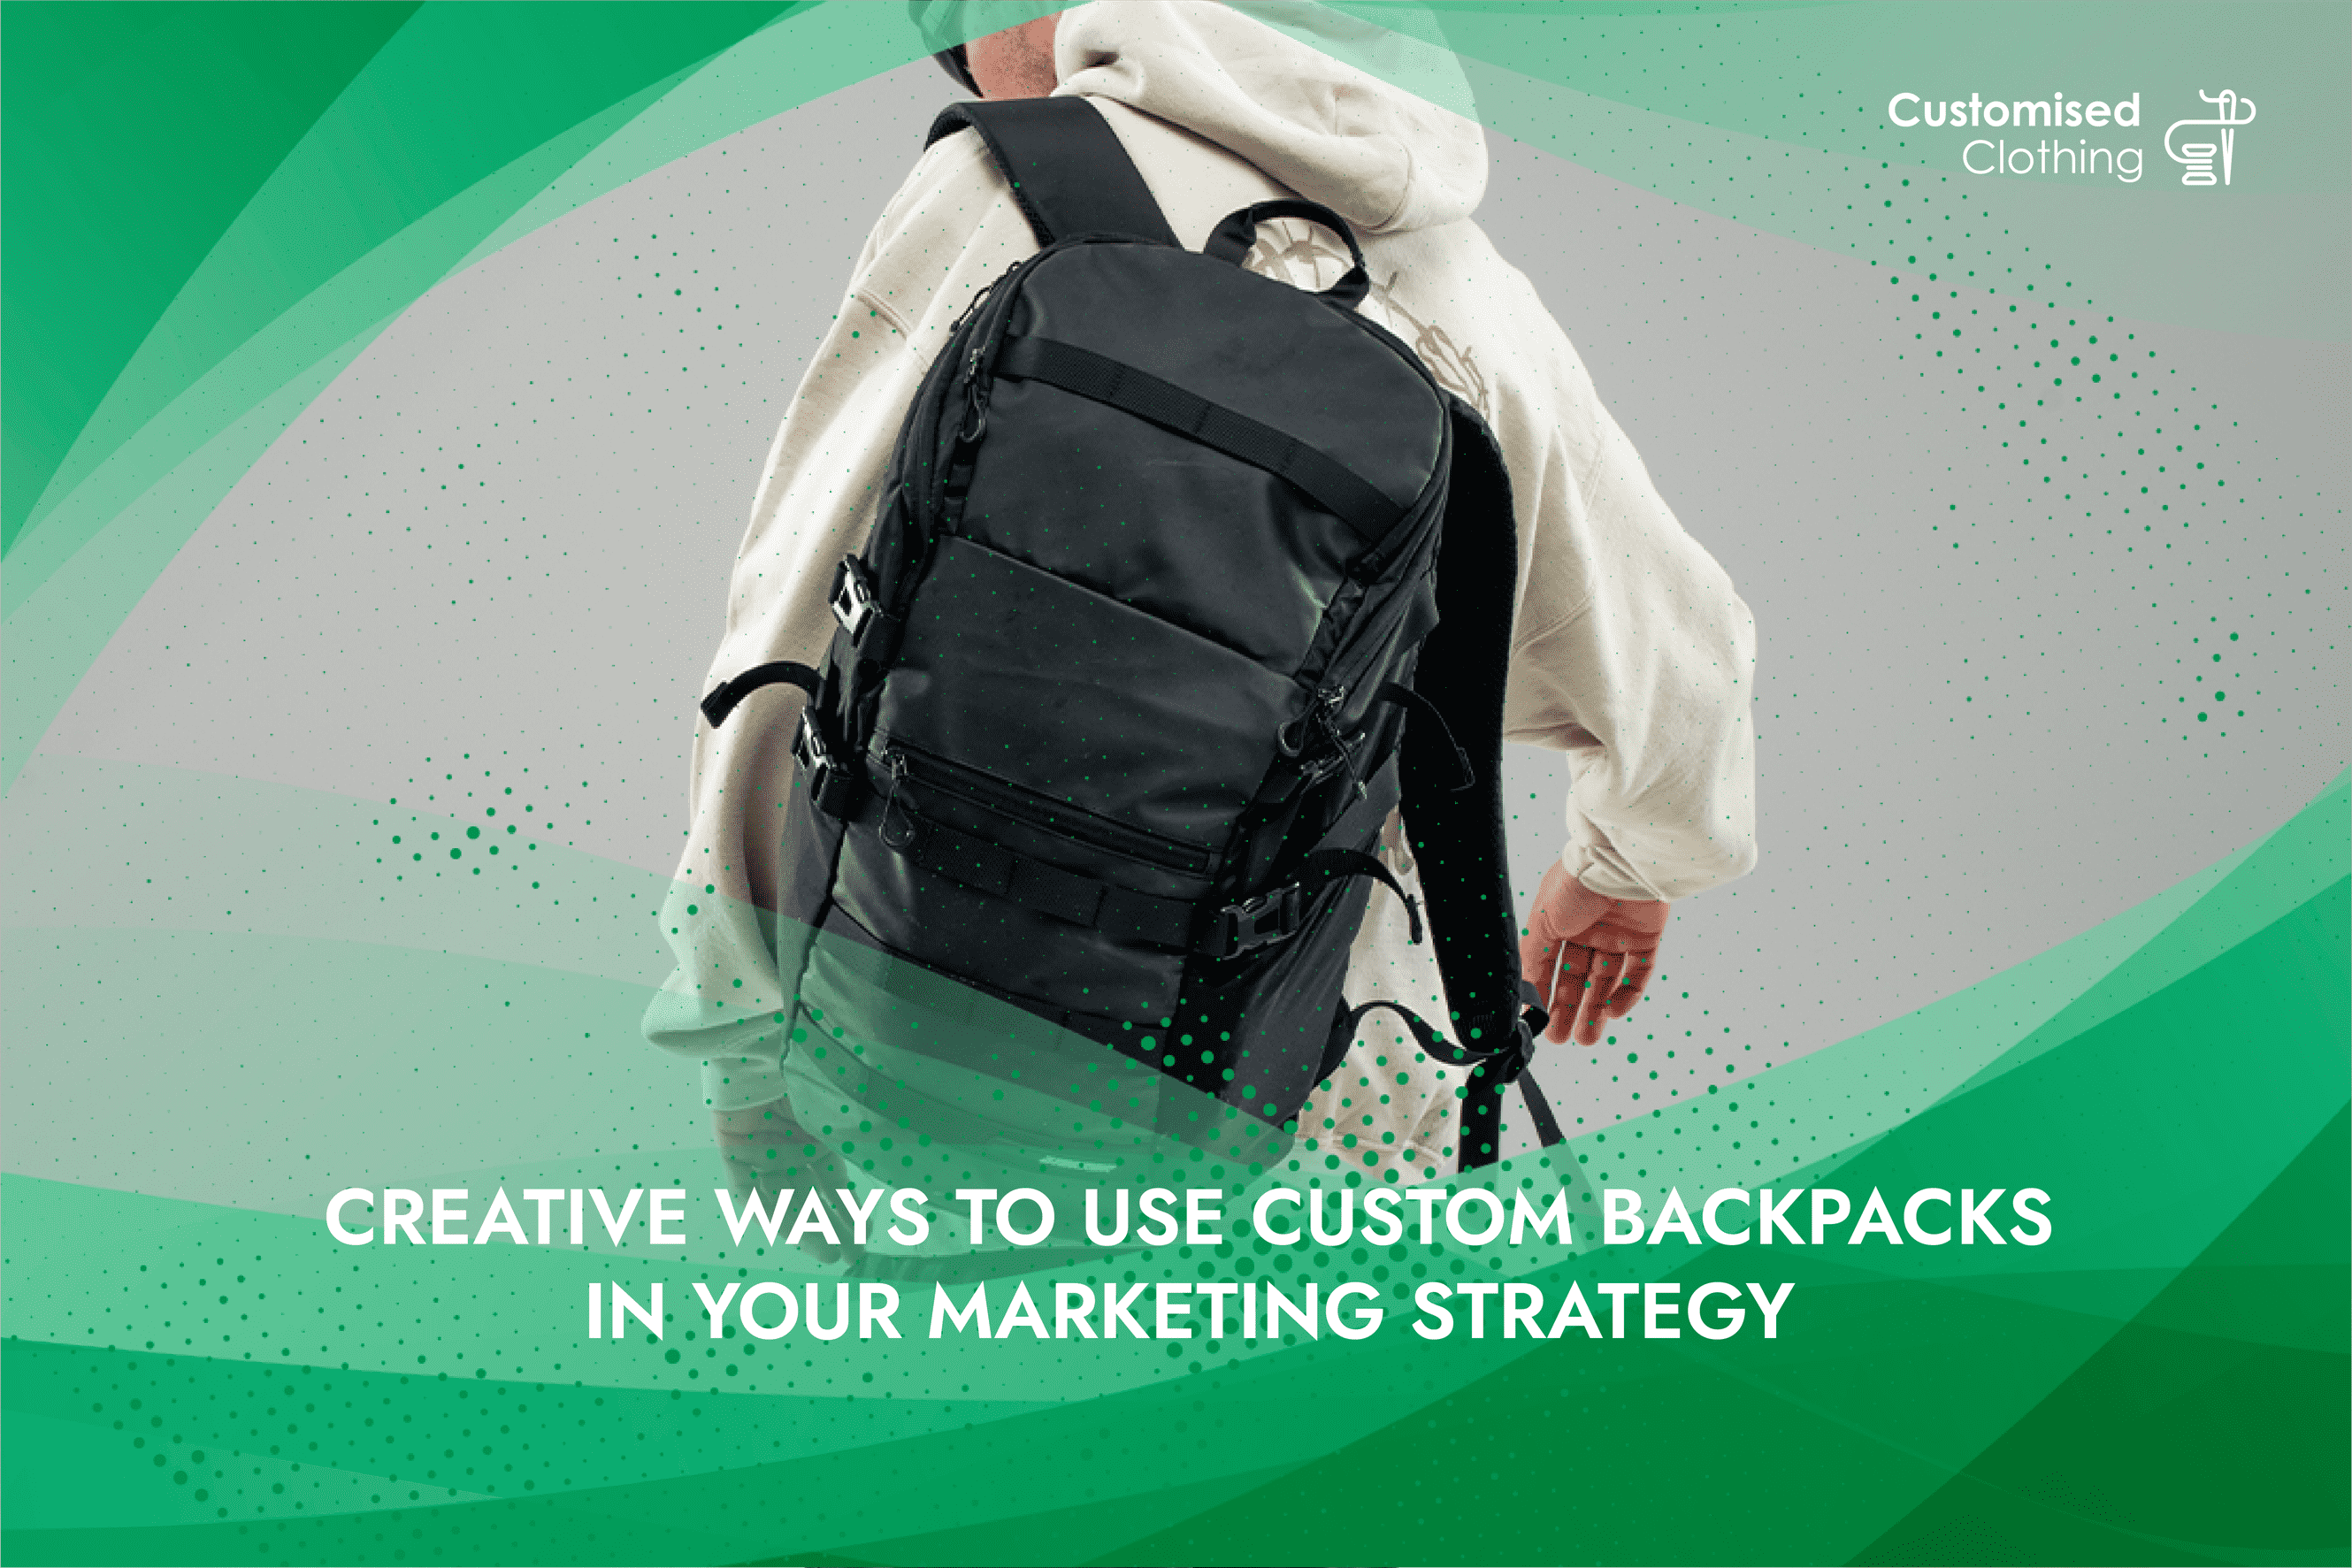 Creative Ways to Use Custom Backpacks in Your Marketing Strategy